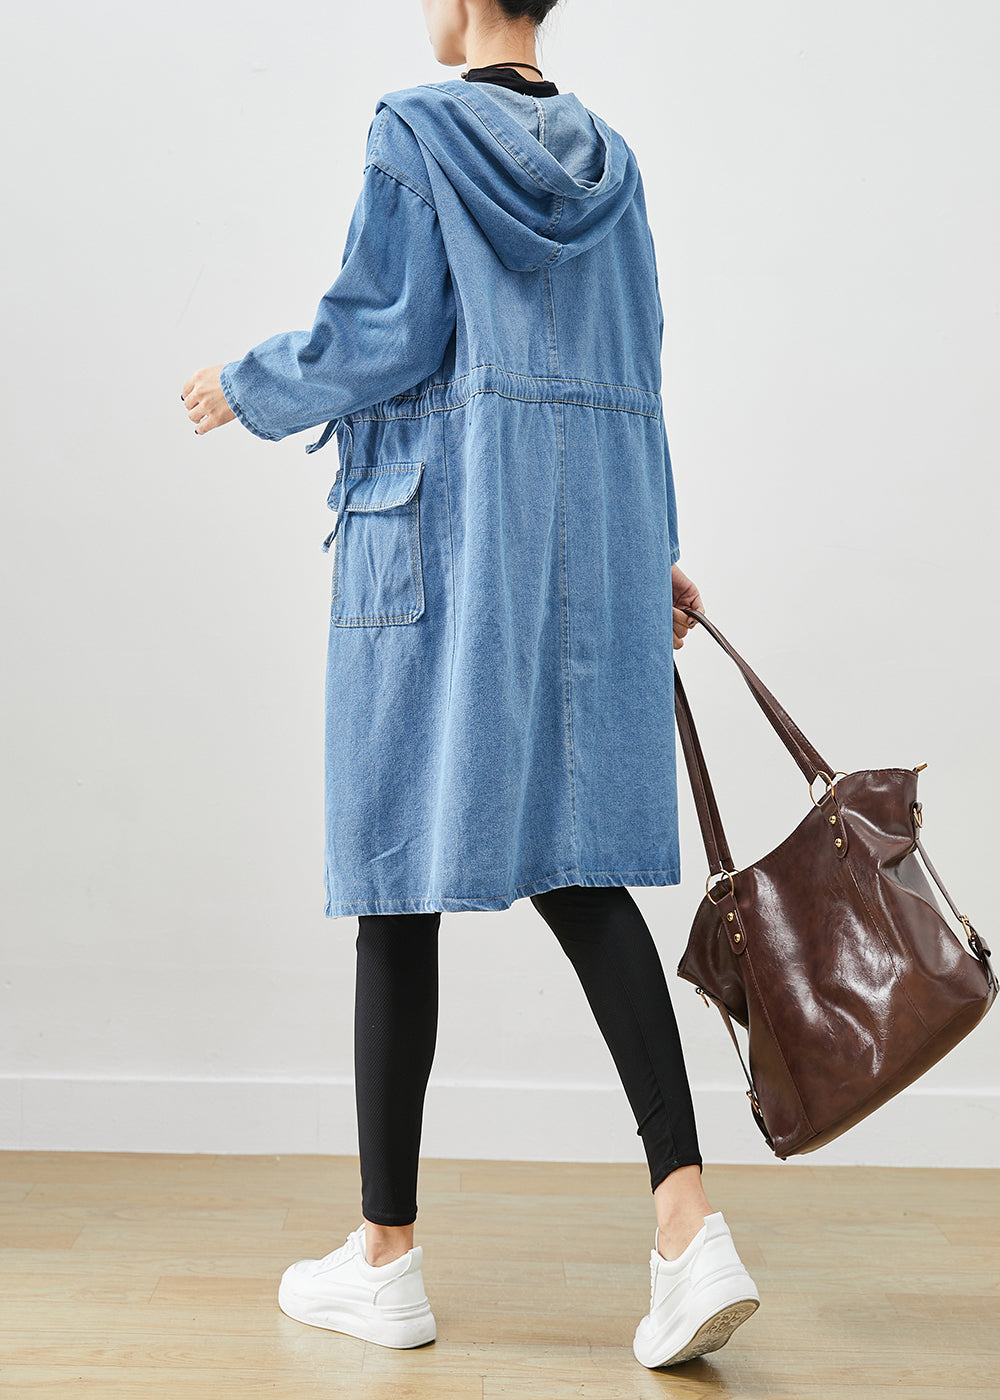 Simple Blue Cinched Hooded Pockets Denim Trench Fall